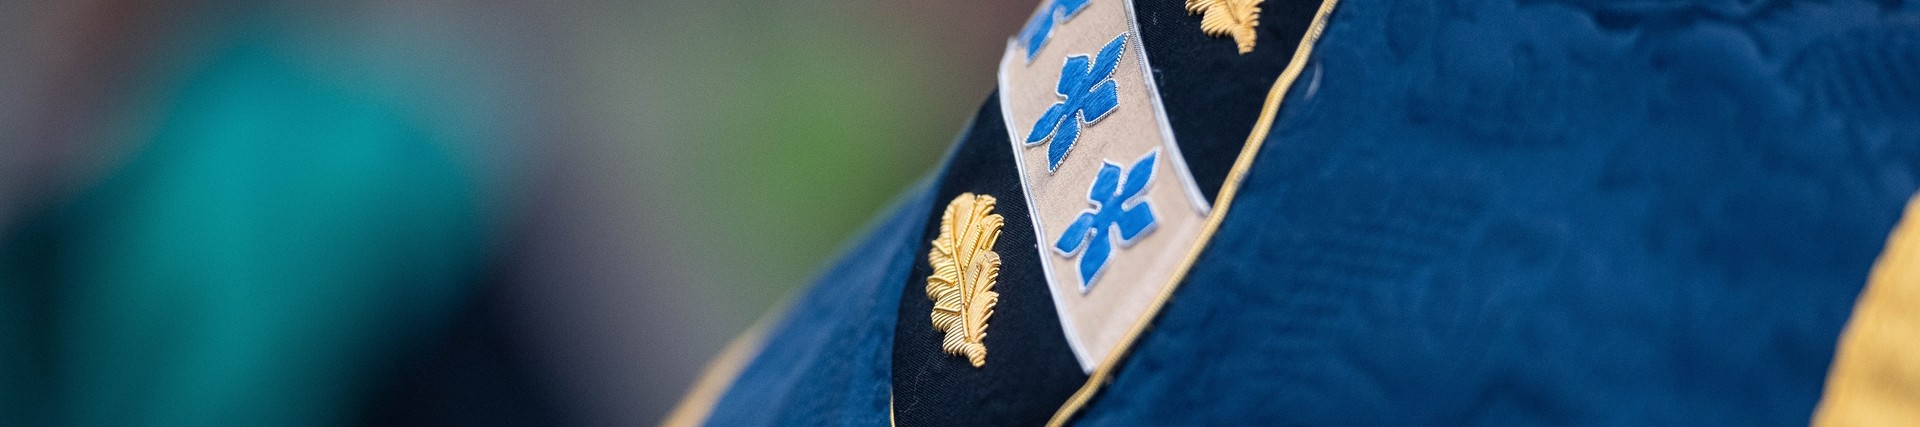 UWTSD badge on the back of a robe